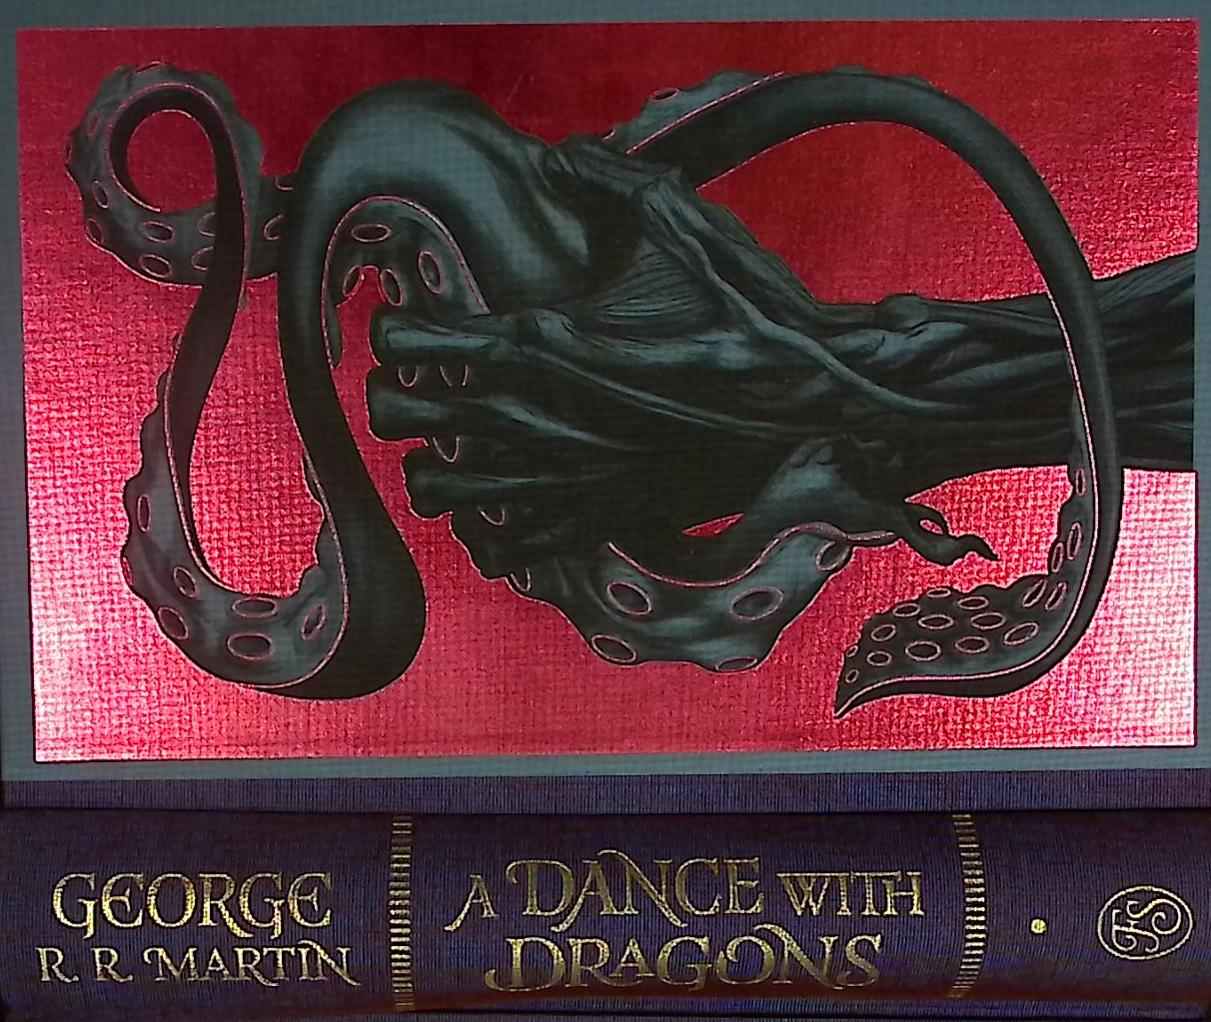 A Dance with Dragons. 2 volume set. [A Song of Ice and Fire Book 5]